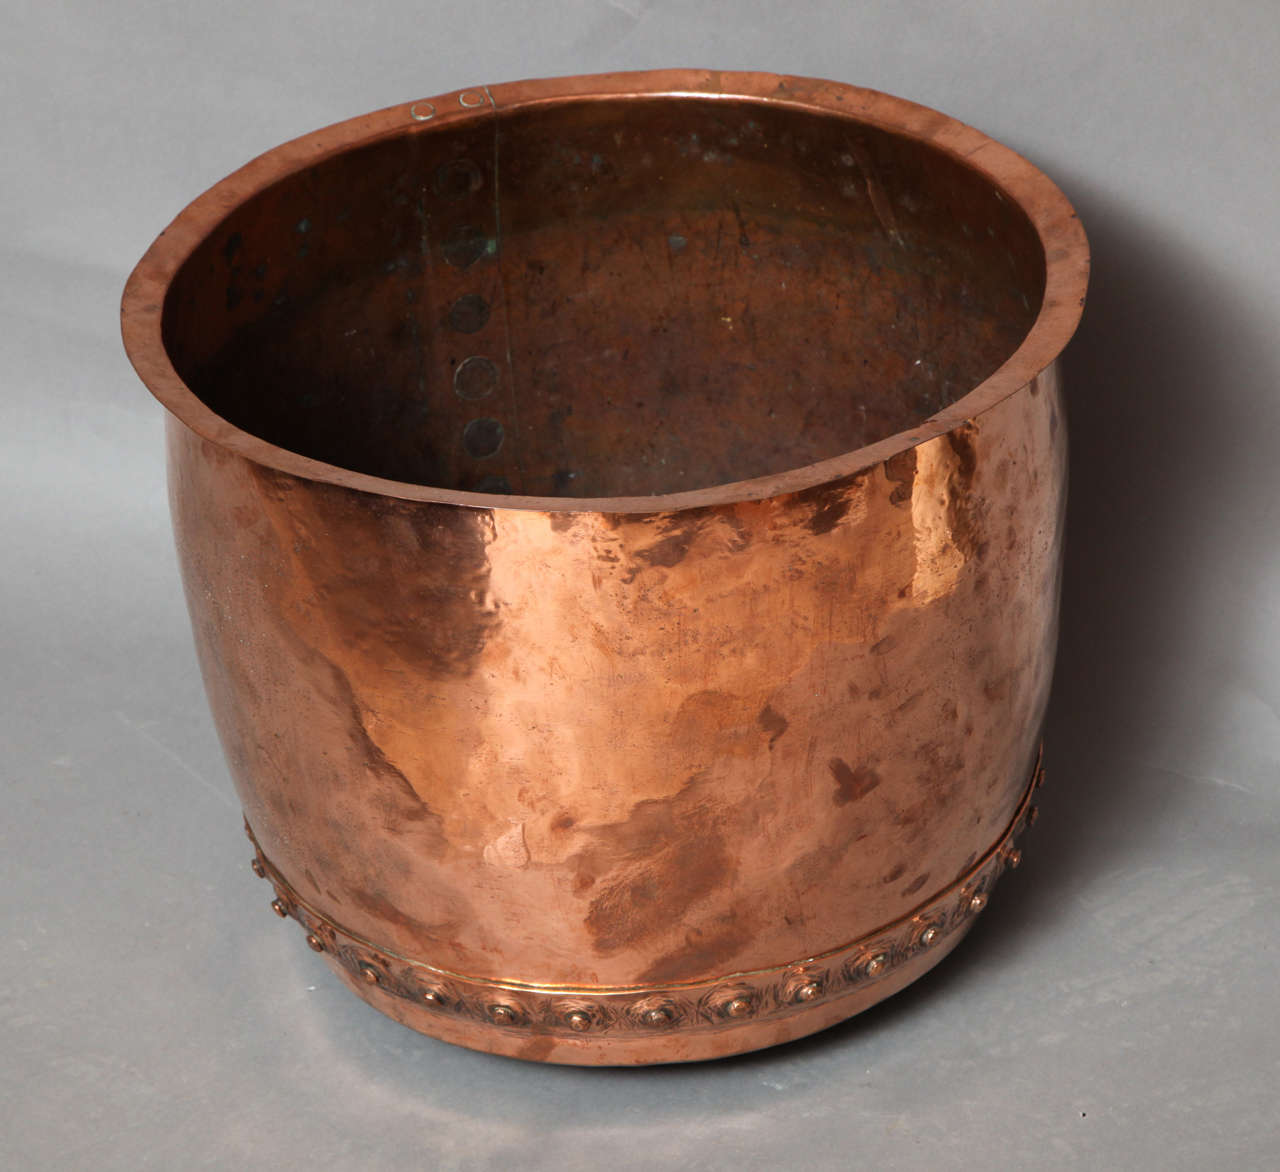 A great late 18th century/early 19th century English copper log container a profusely hand hammered and rivetted surface.  Beautiful patina and good scale.